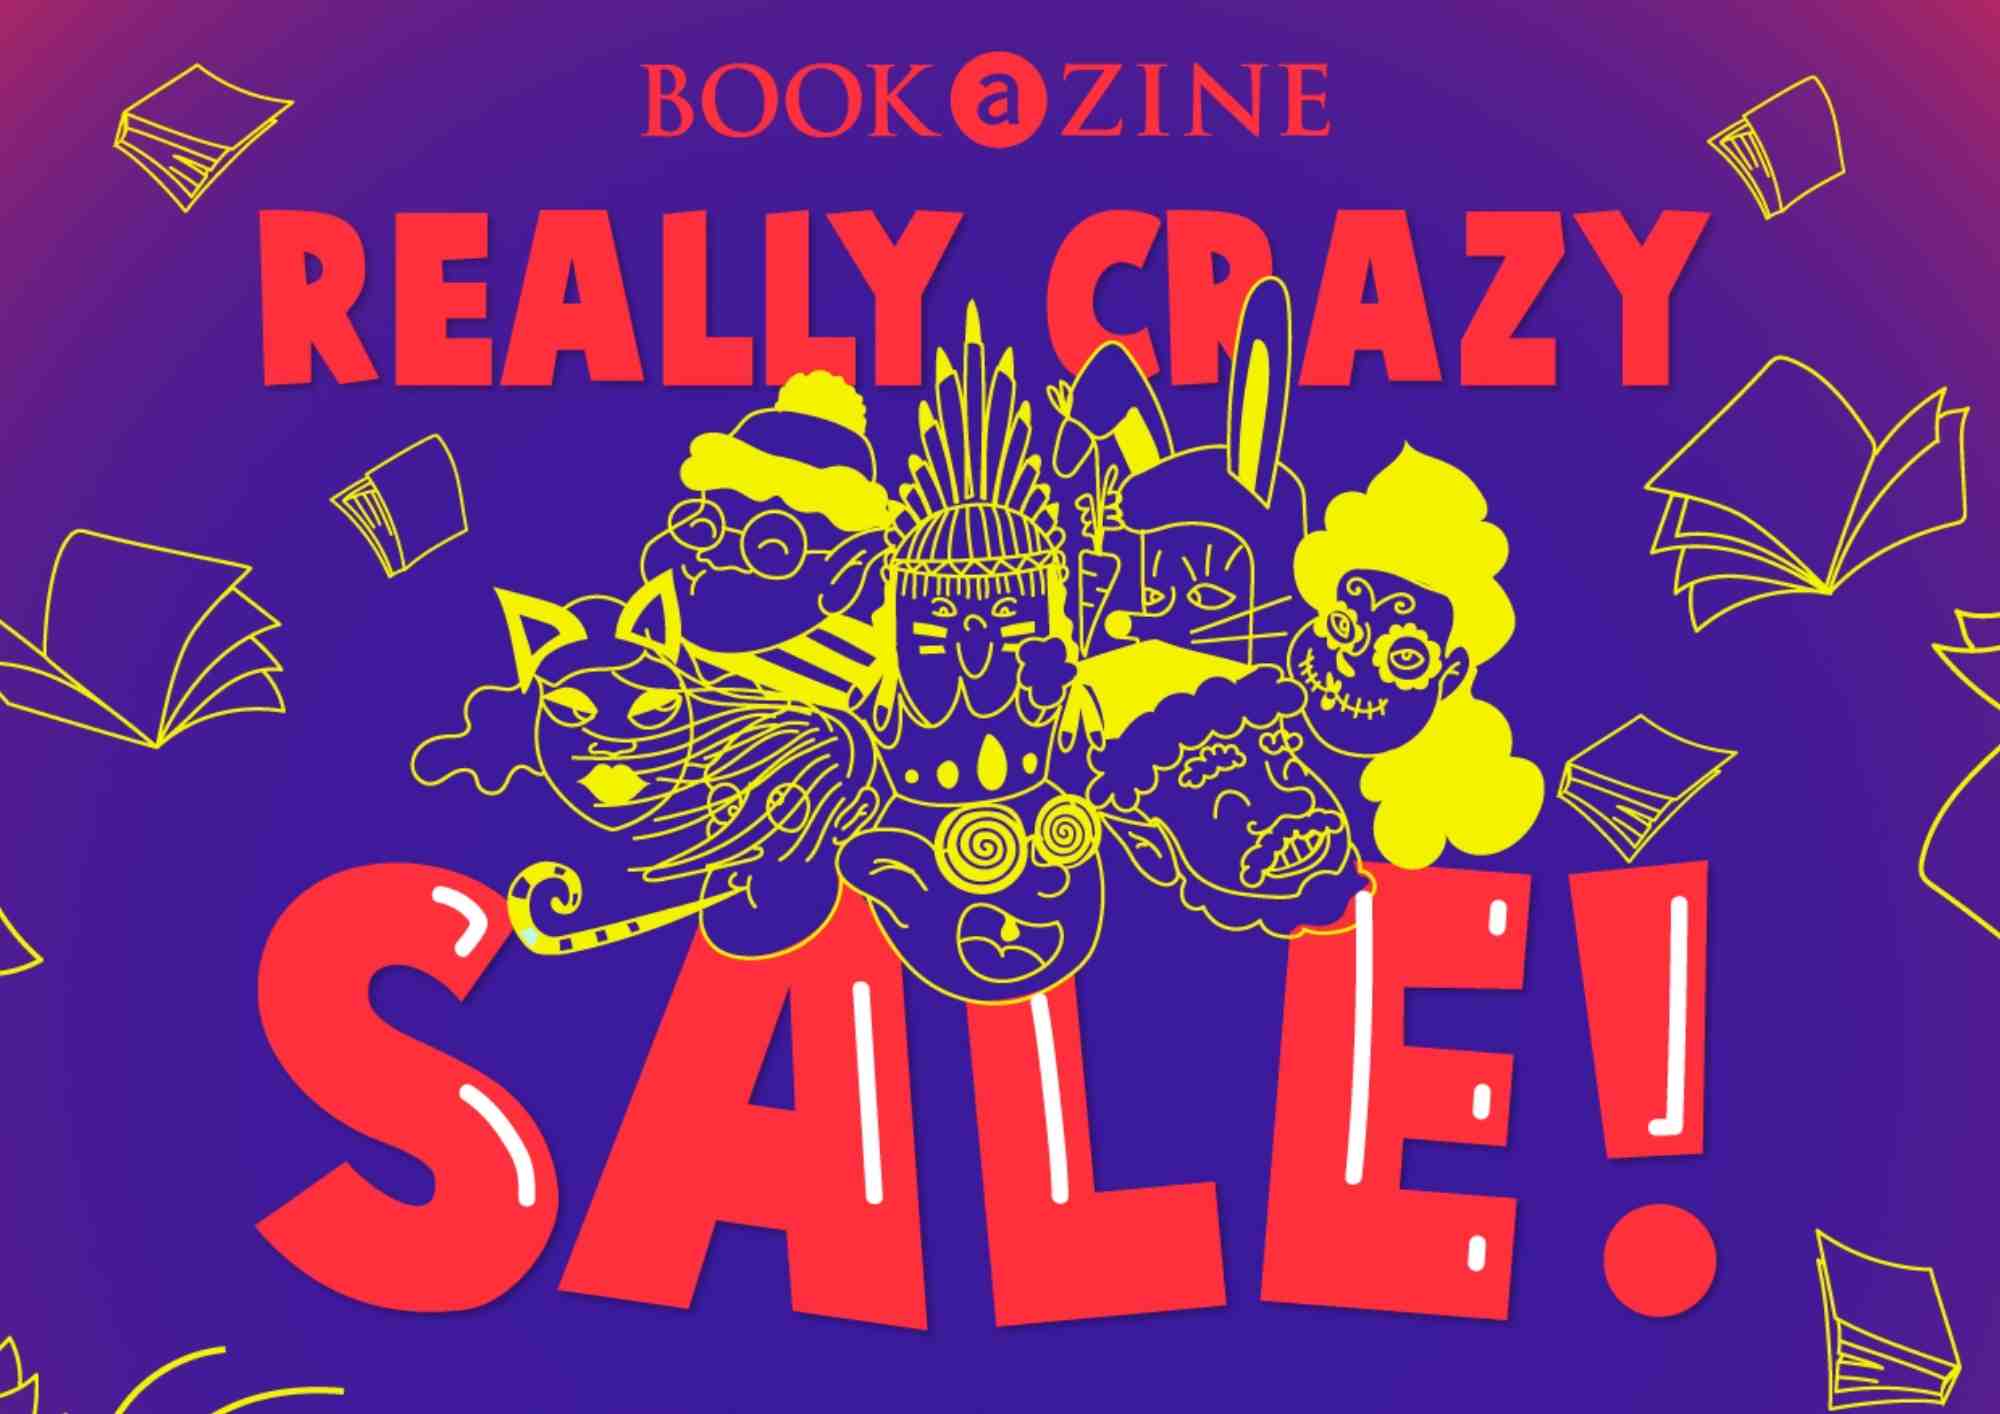 Our Really Crazy Sale is On!!